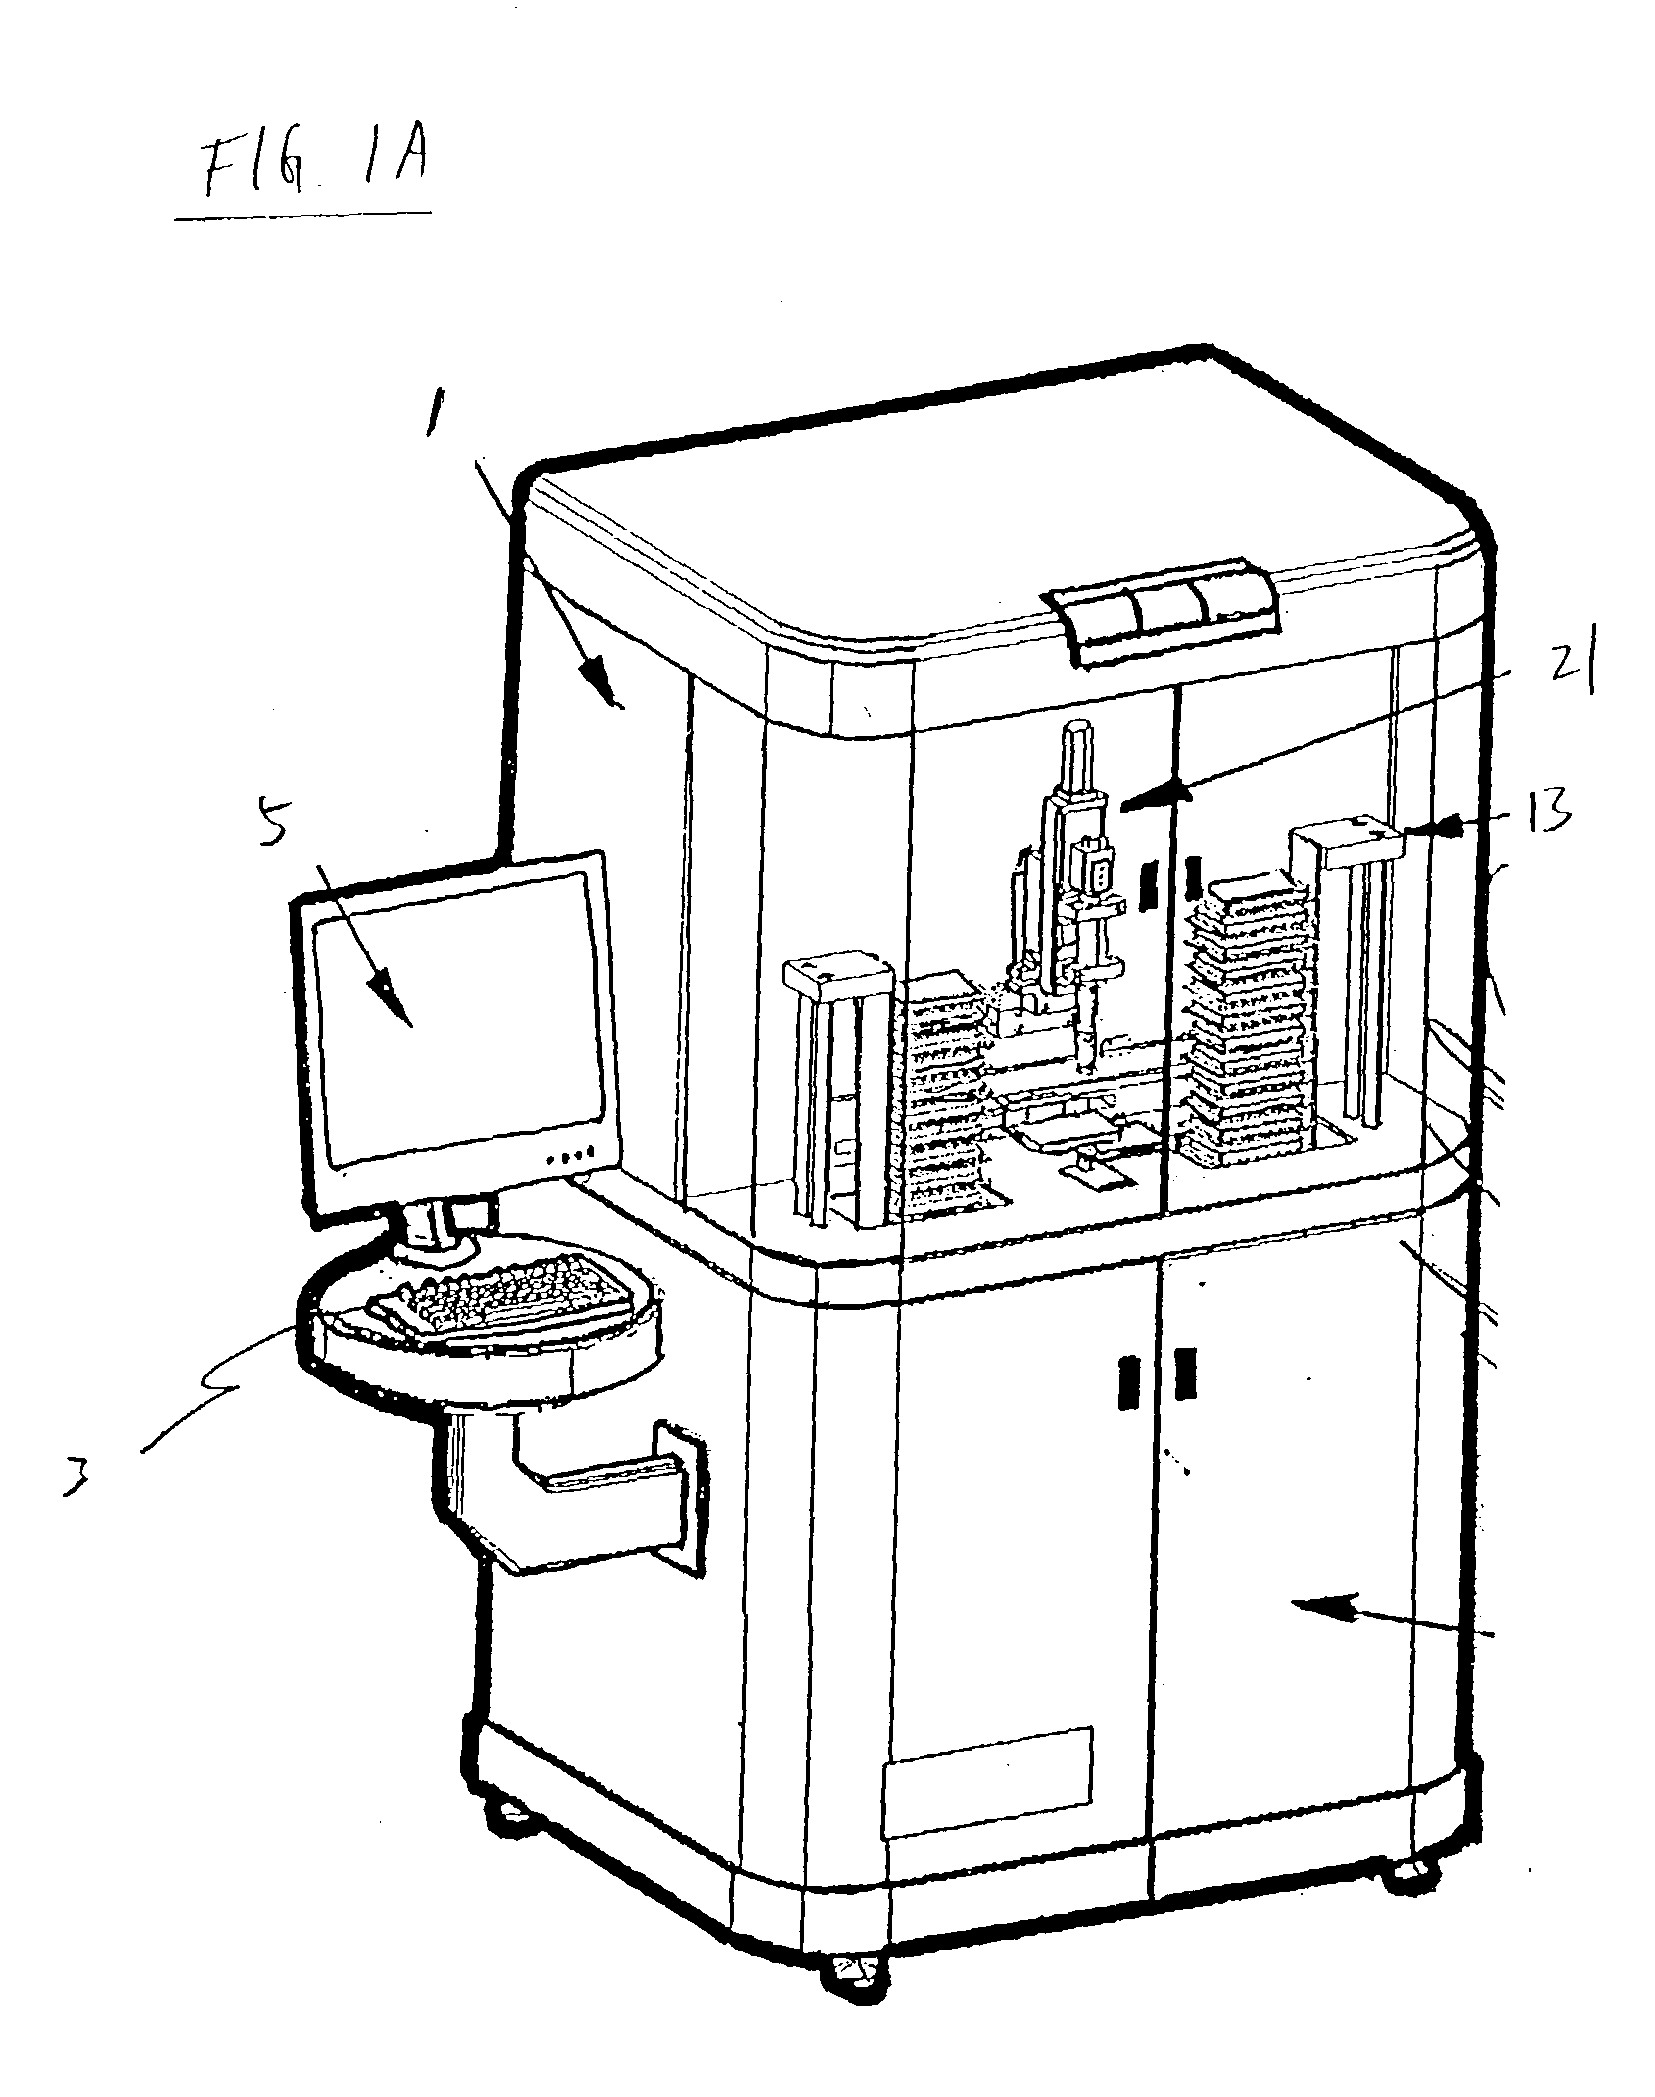 Source and target management system for high throughput transfer of liquids